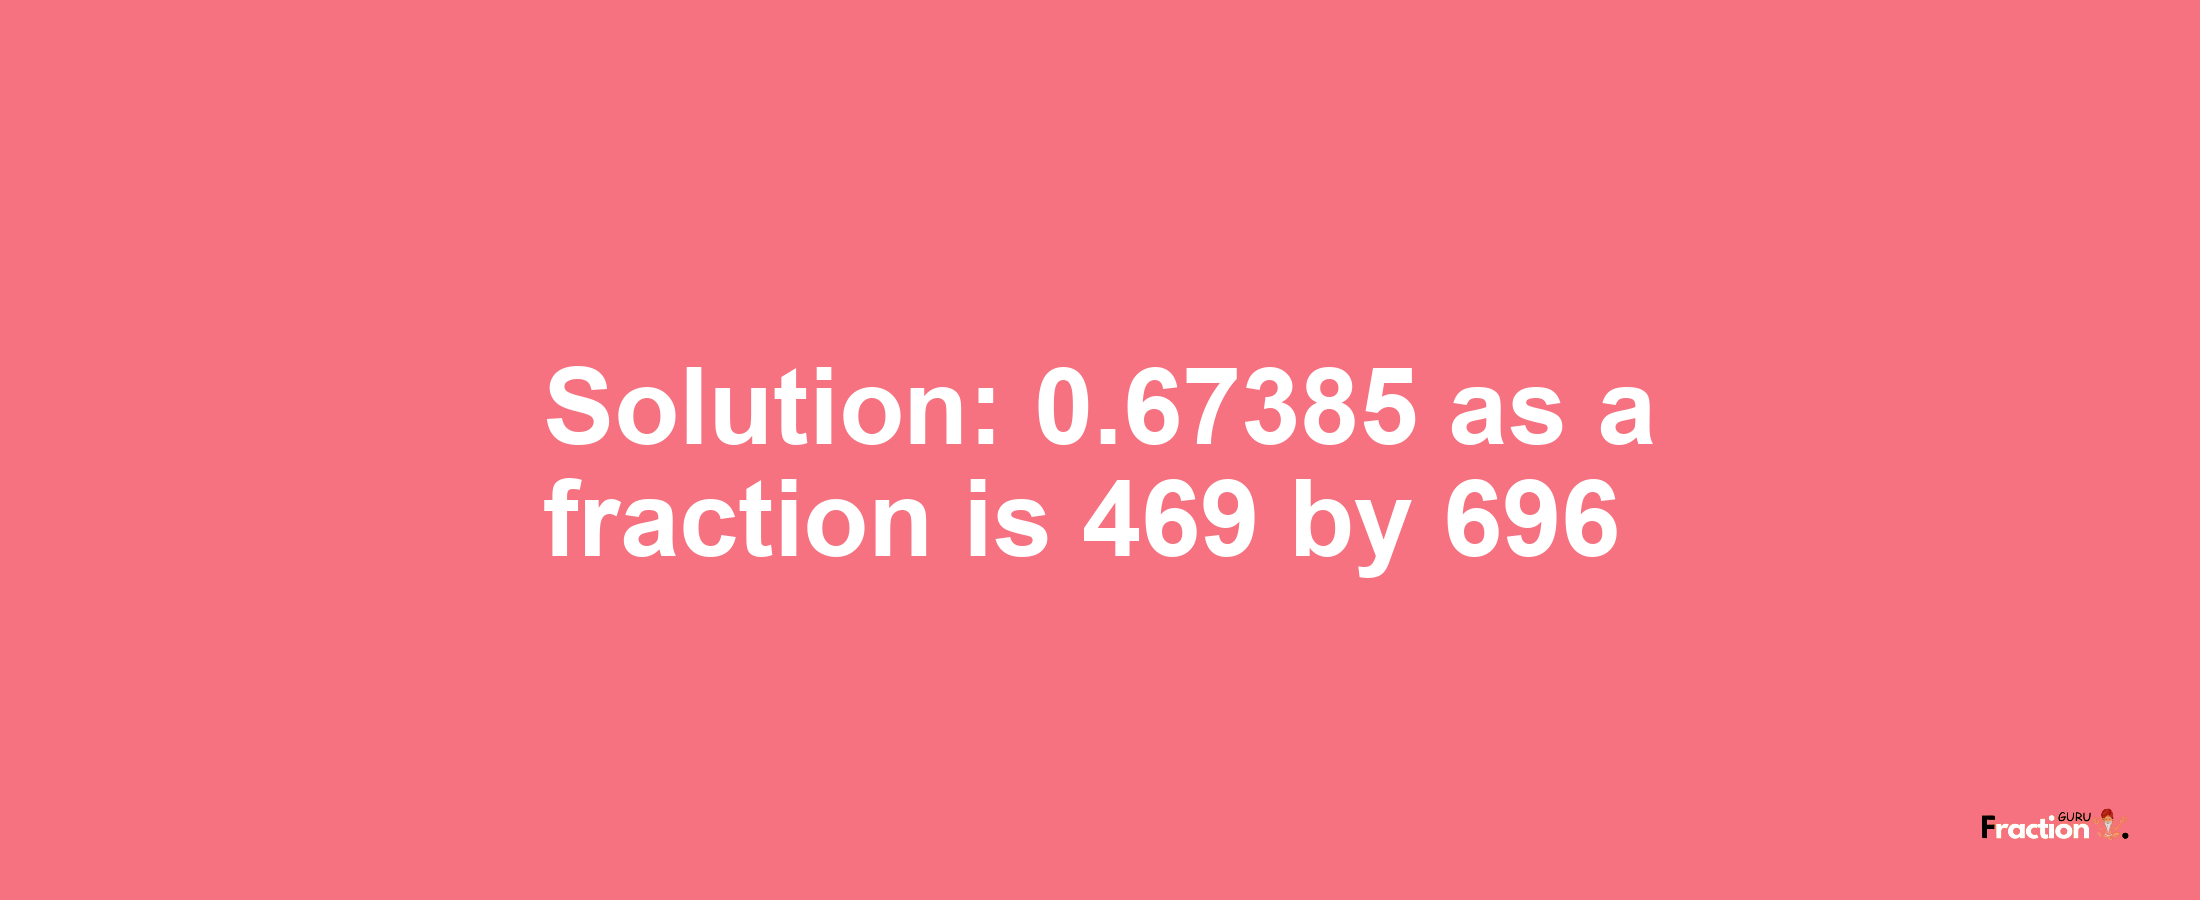 Solution:0.67385 as a fraction is 469/696